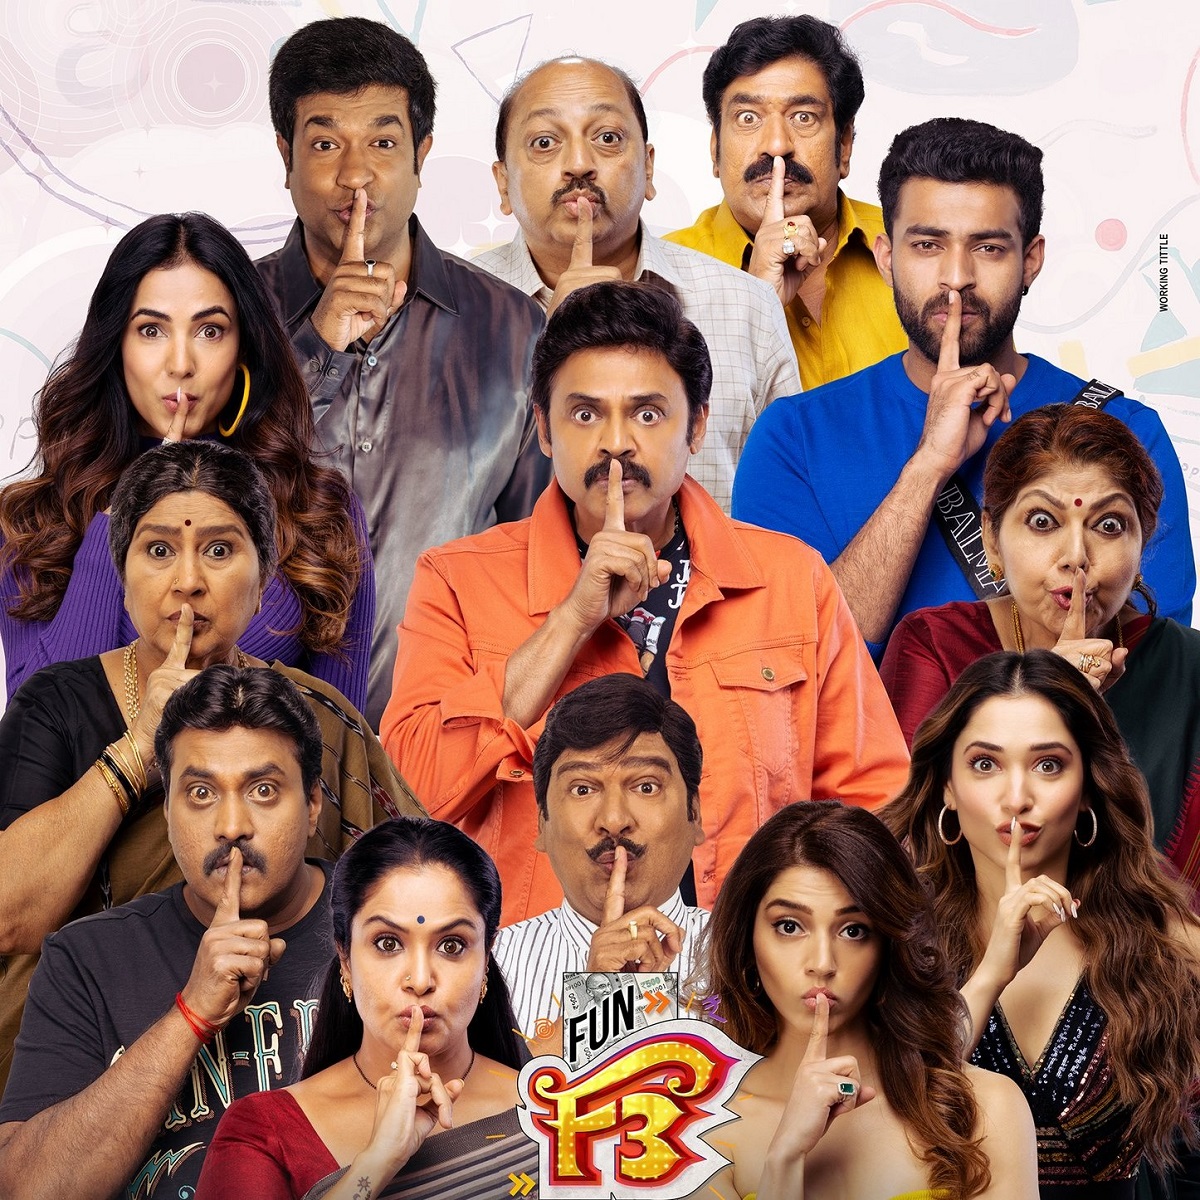 F3 Box Office Collections; Venkatesh - Varun Tej starrer has a Good start, Doubles F2 opening weekend